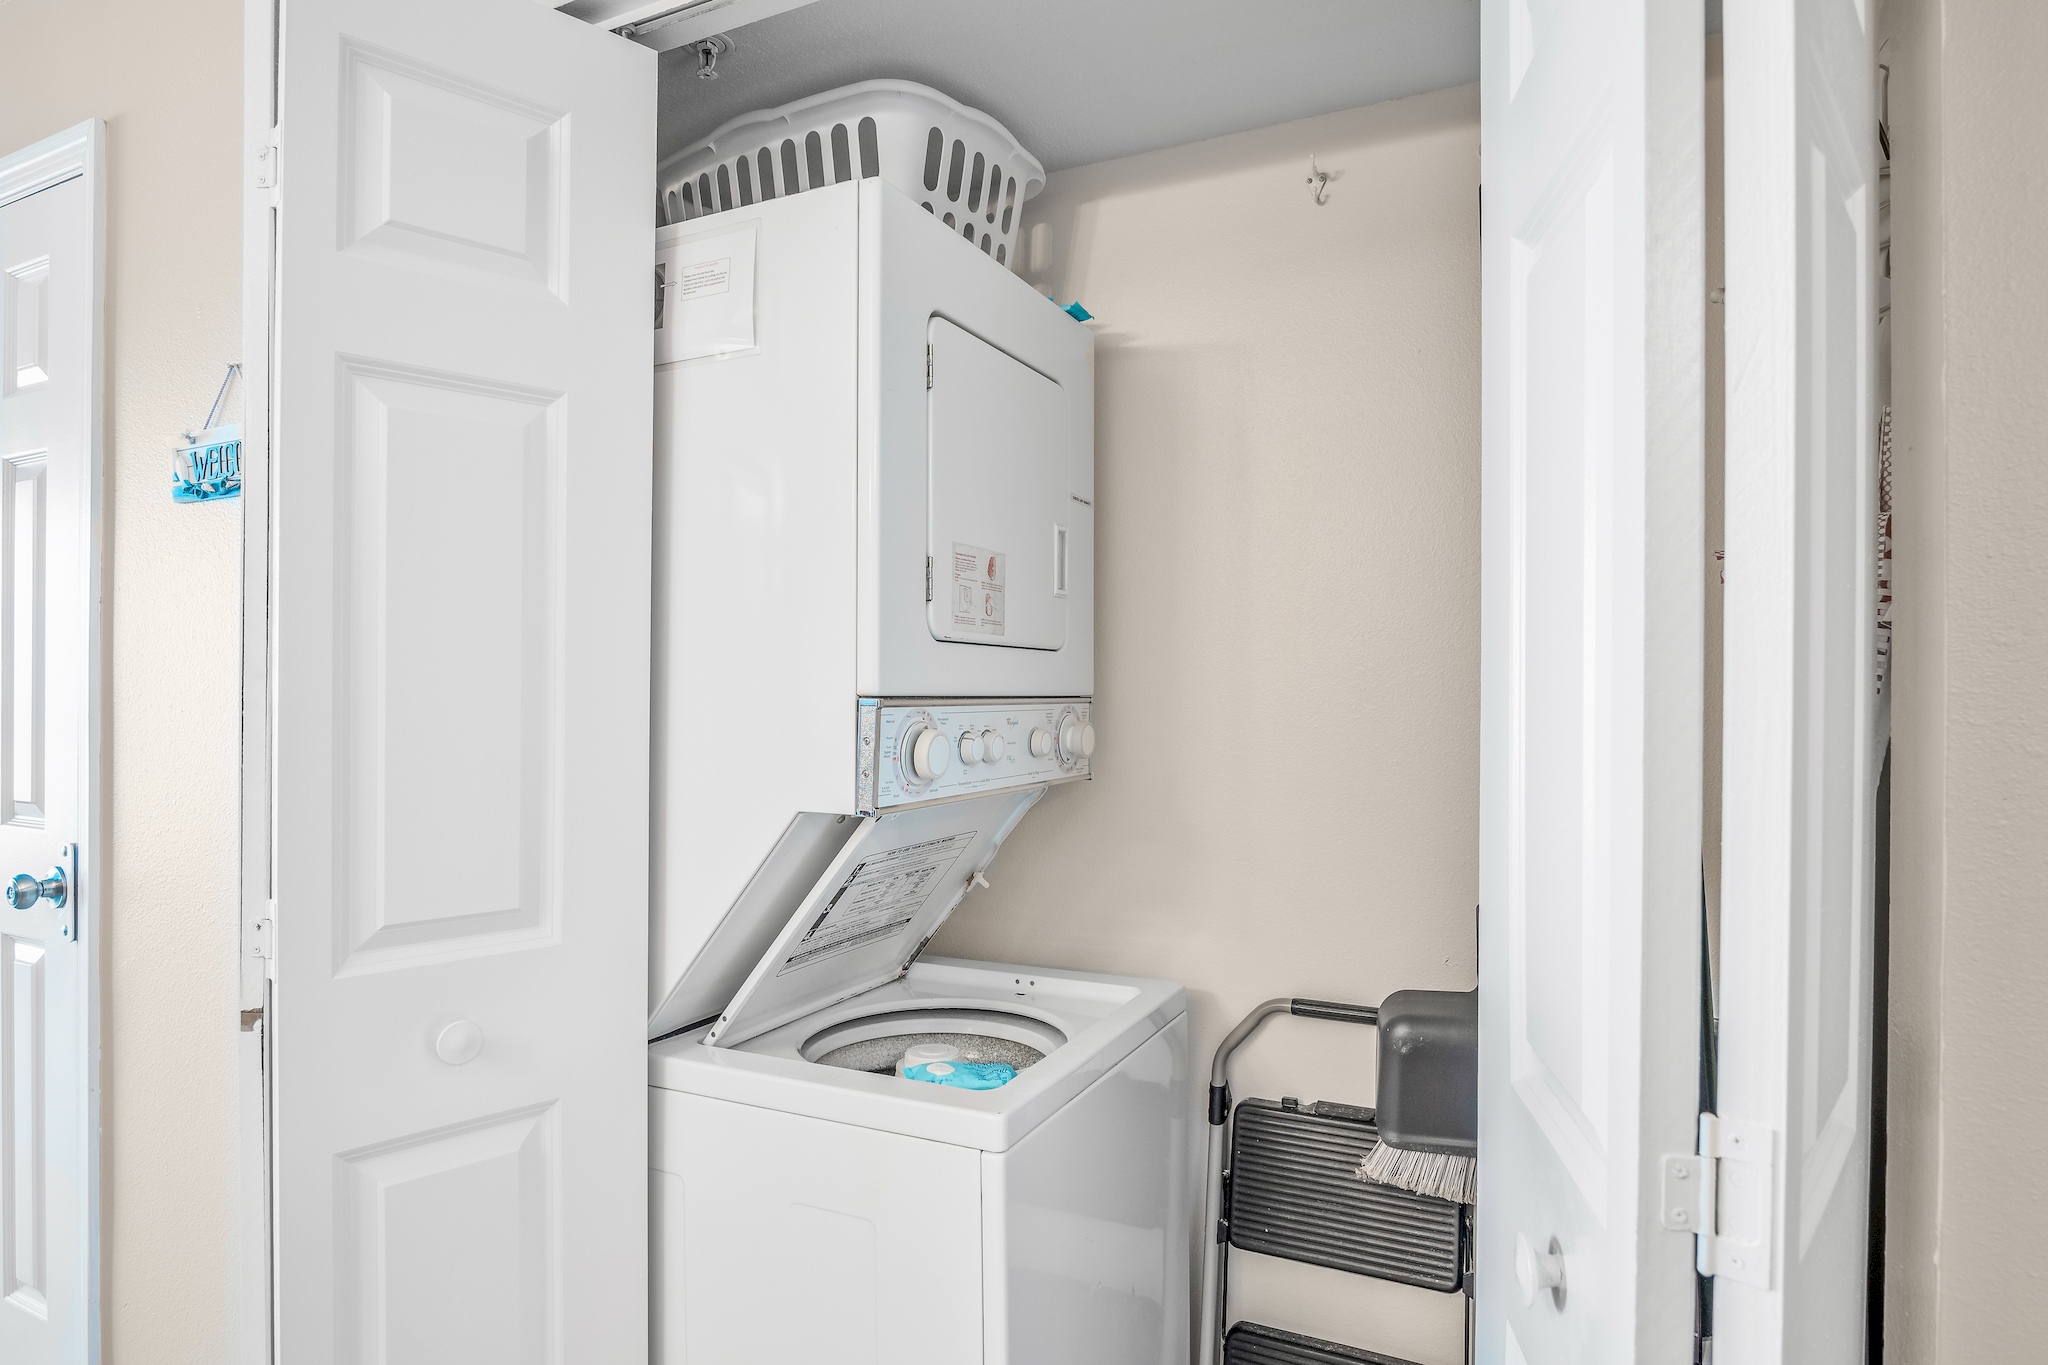 Washer and dryer in the unit